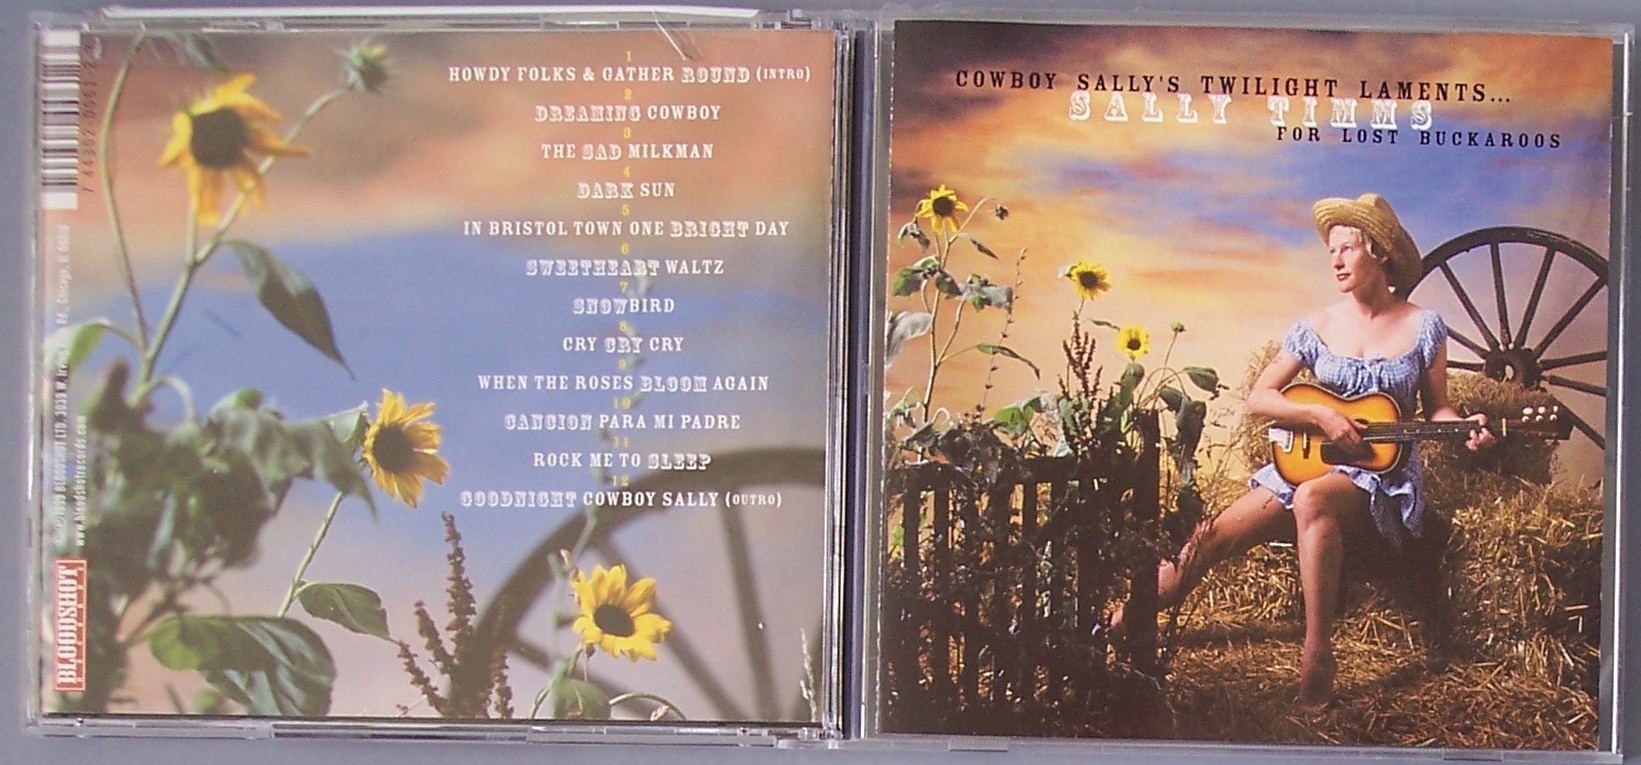 cd cover with woman sitting on a wheel surrounded by sunflowers